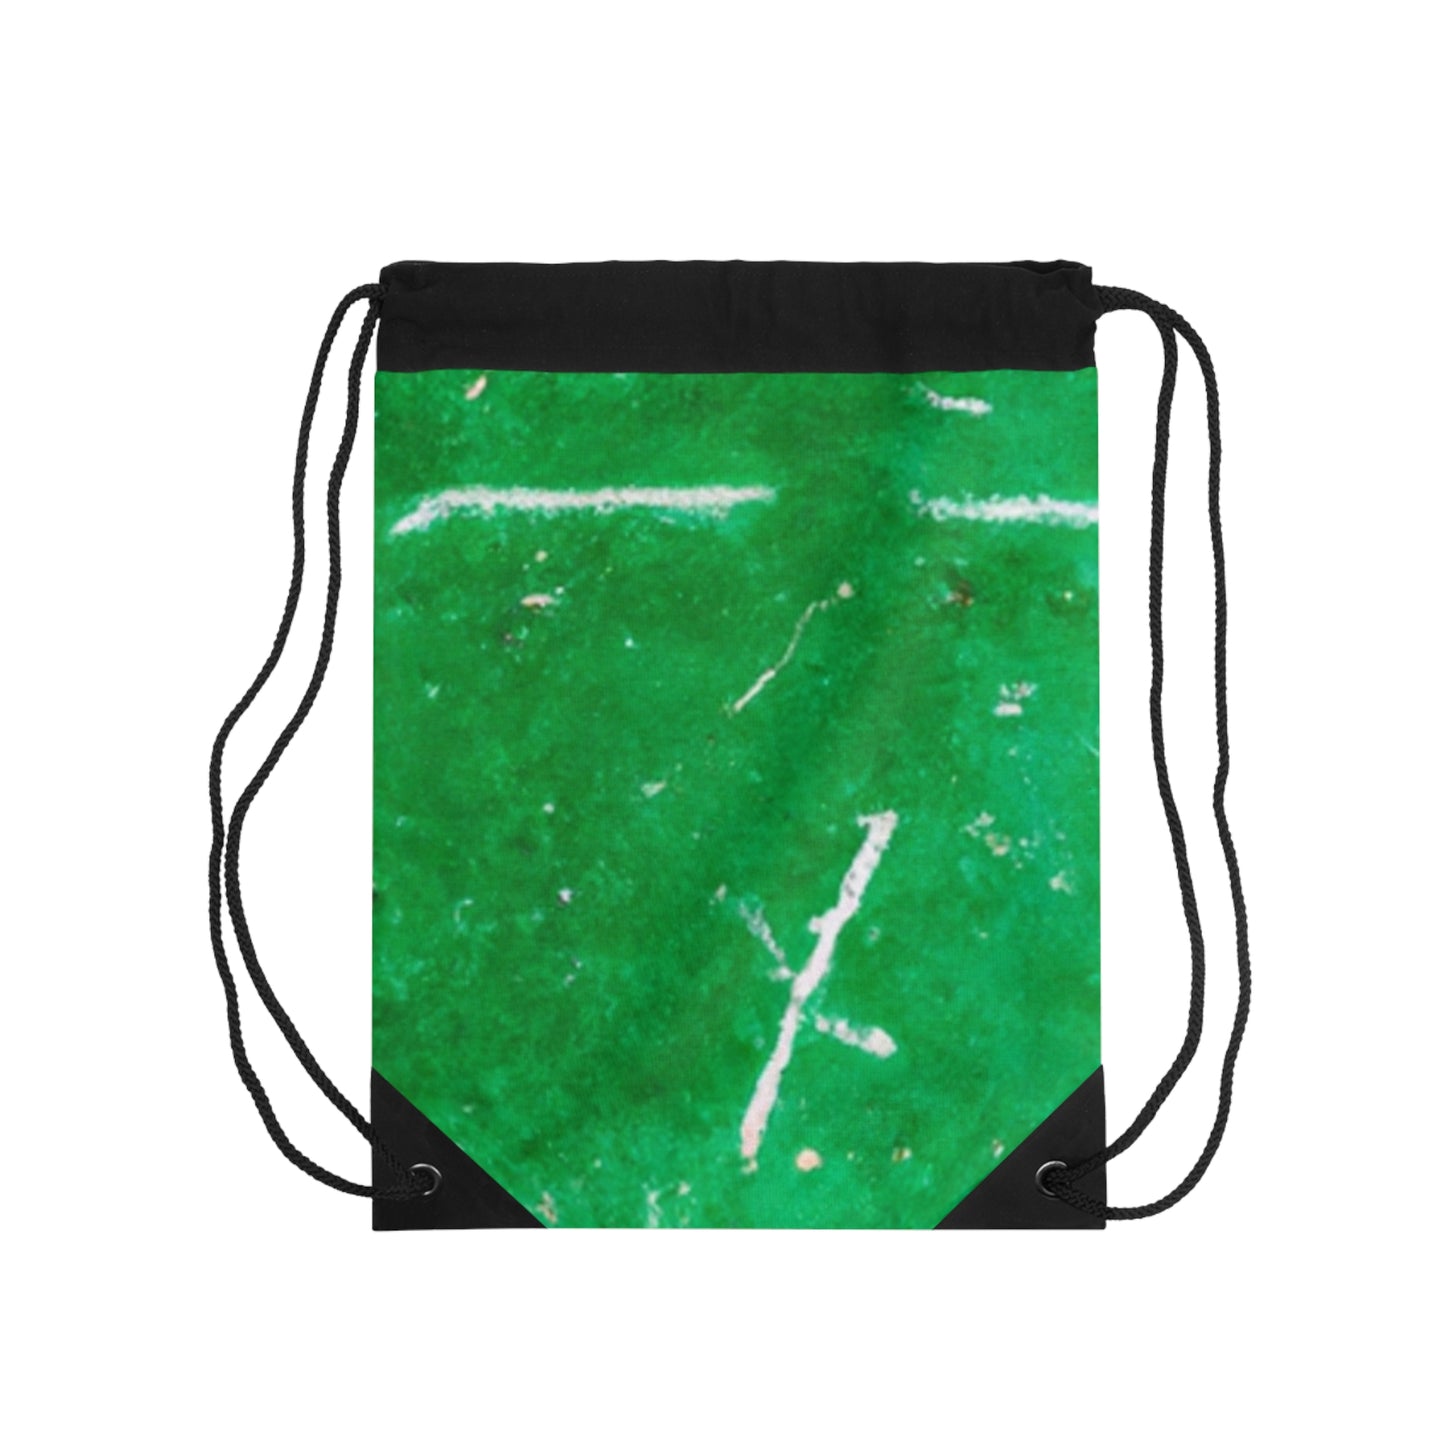 "Dynamic Sporting Spectacle: Capturing the Excitement of Your Favorite Sport!" - Go Plus Drawstring Bag